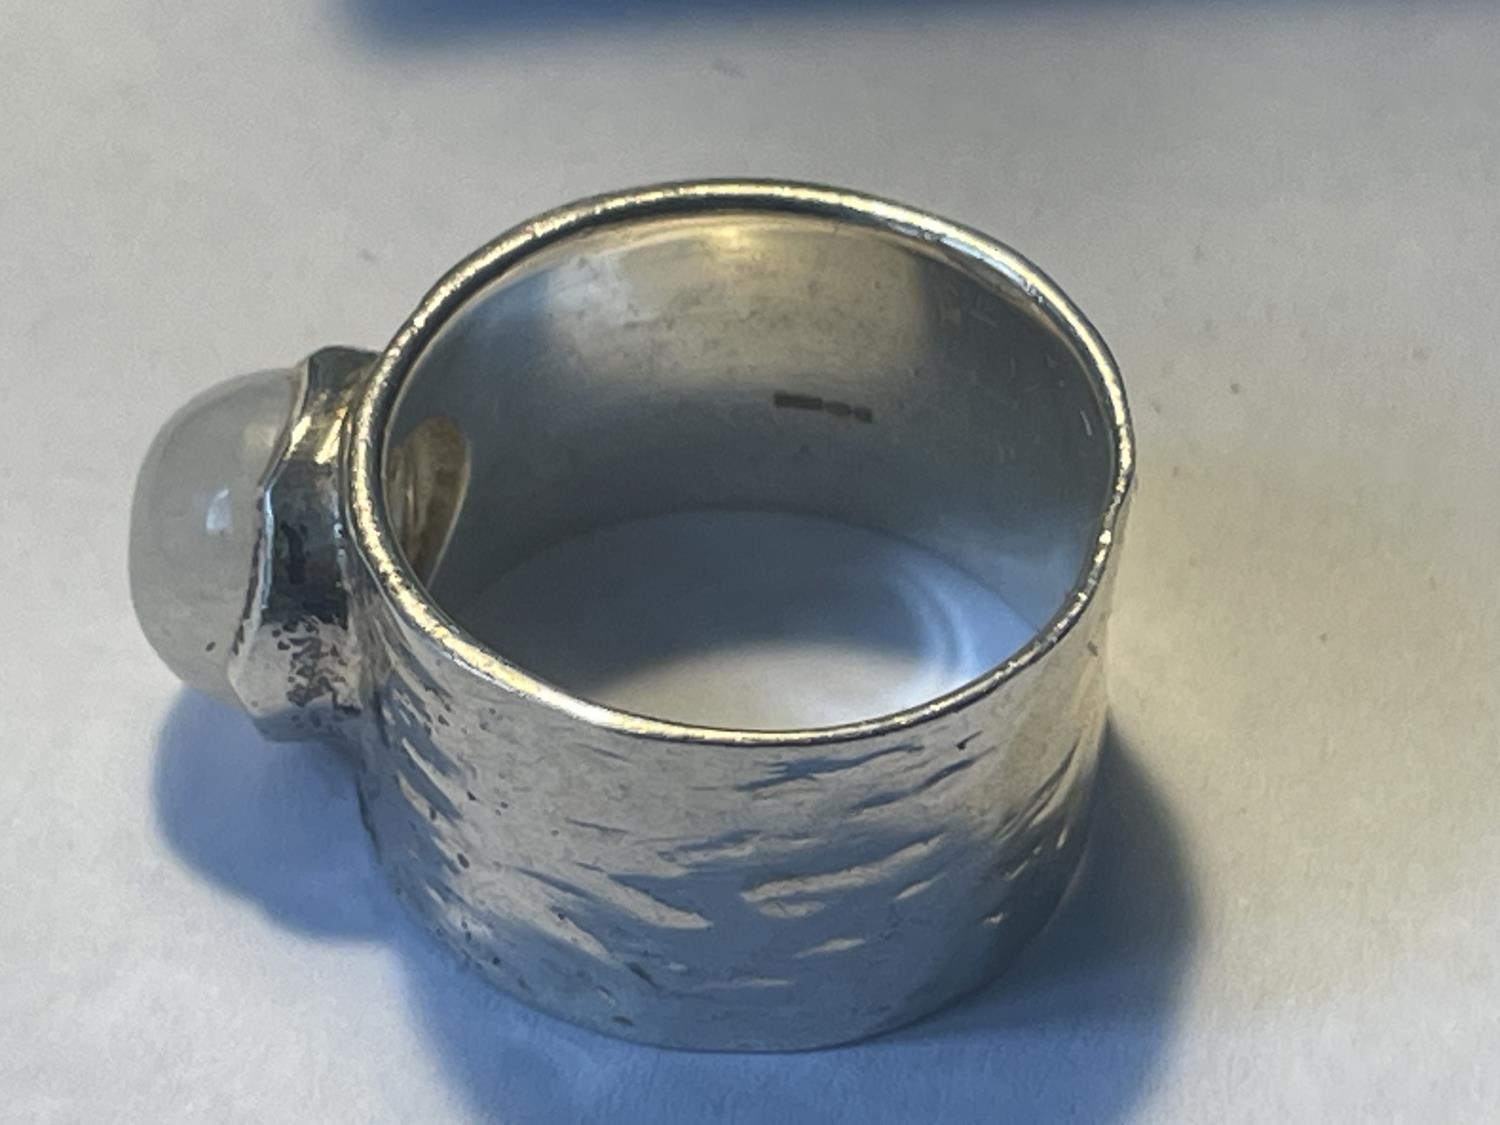 A SILVER RING WITH OPAQUE STONE IN A PRESENTATION BOX - Image 3 of 4